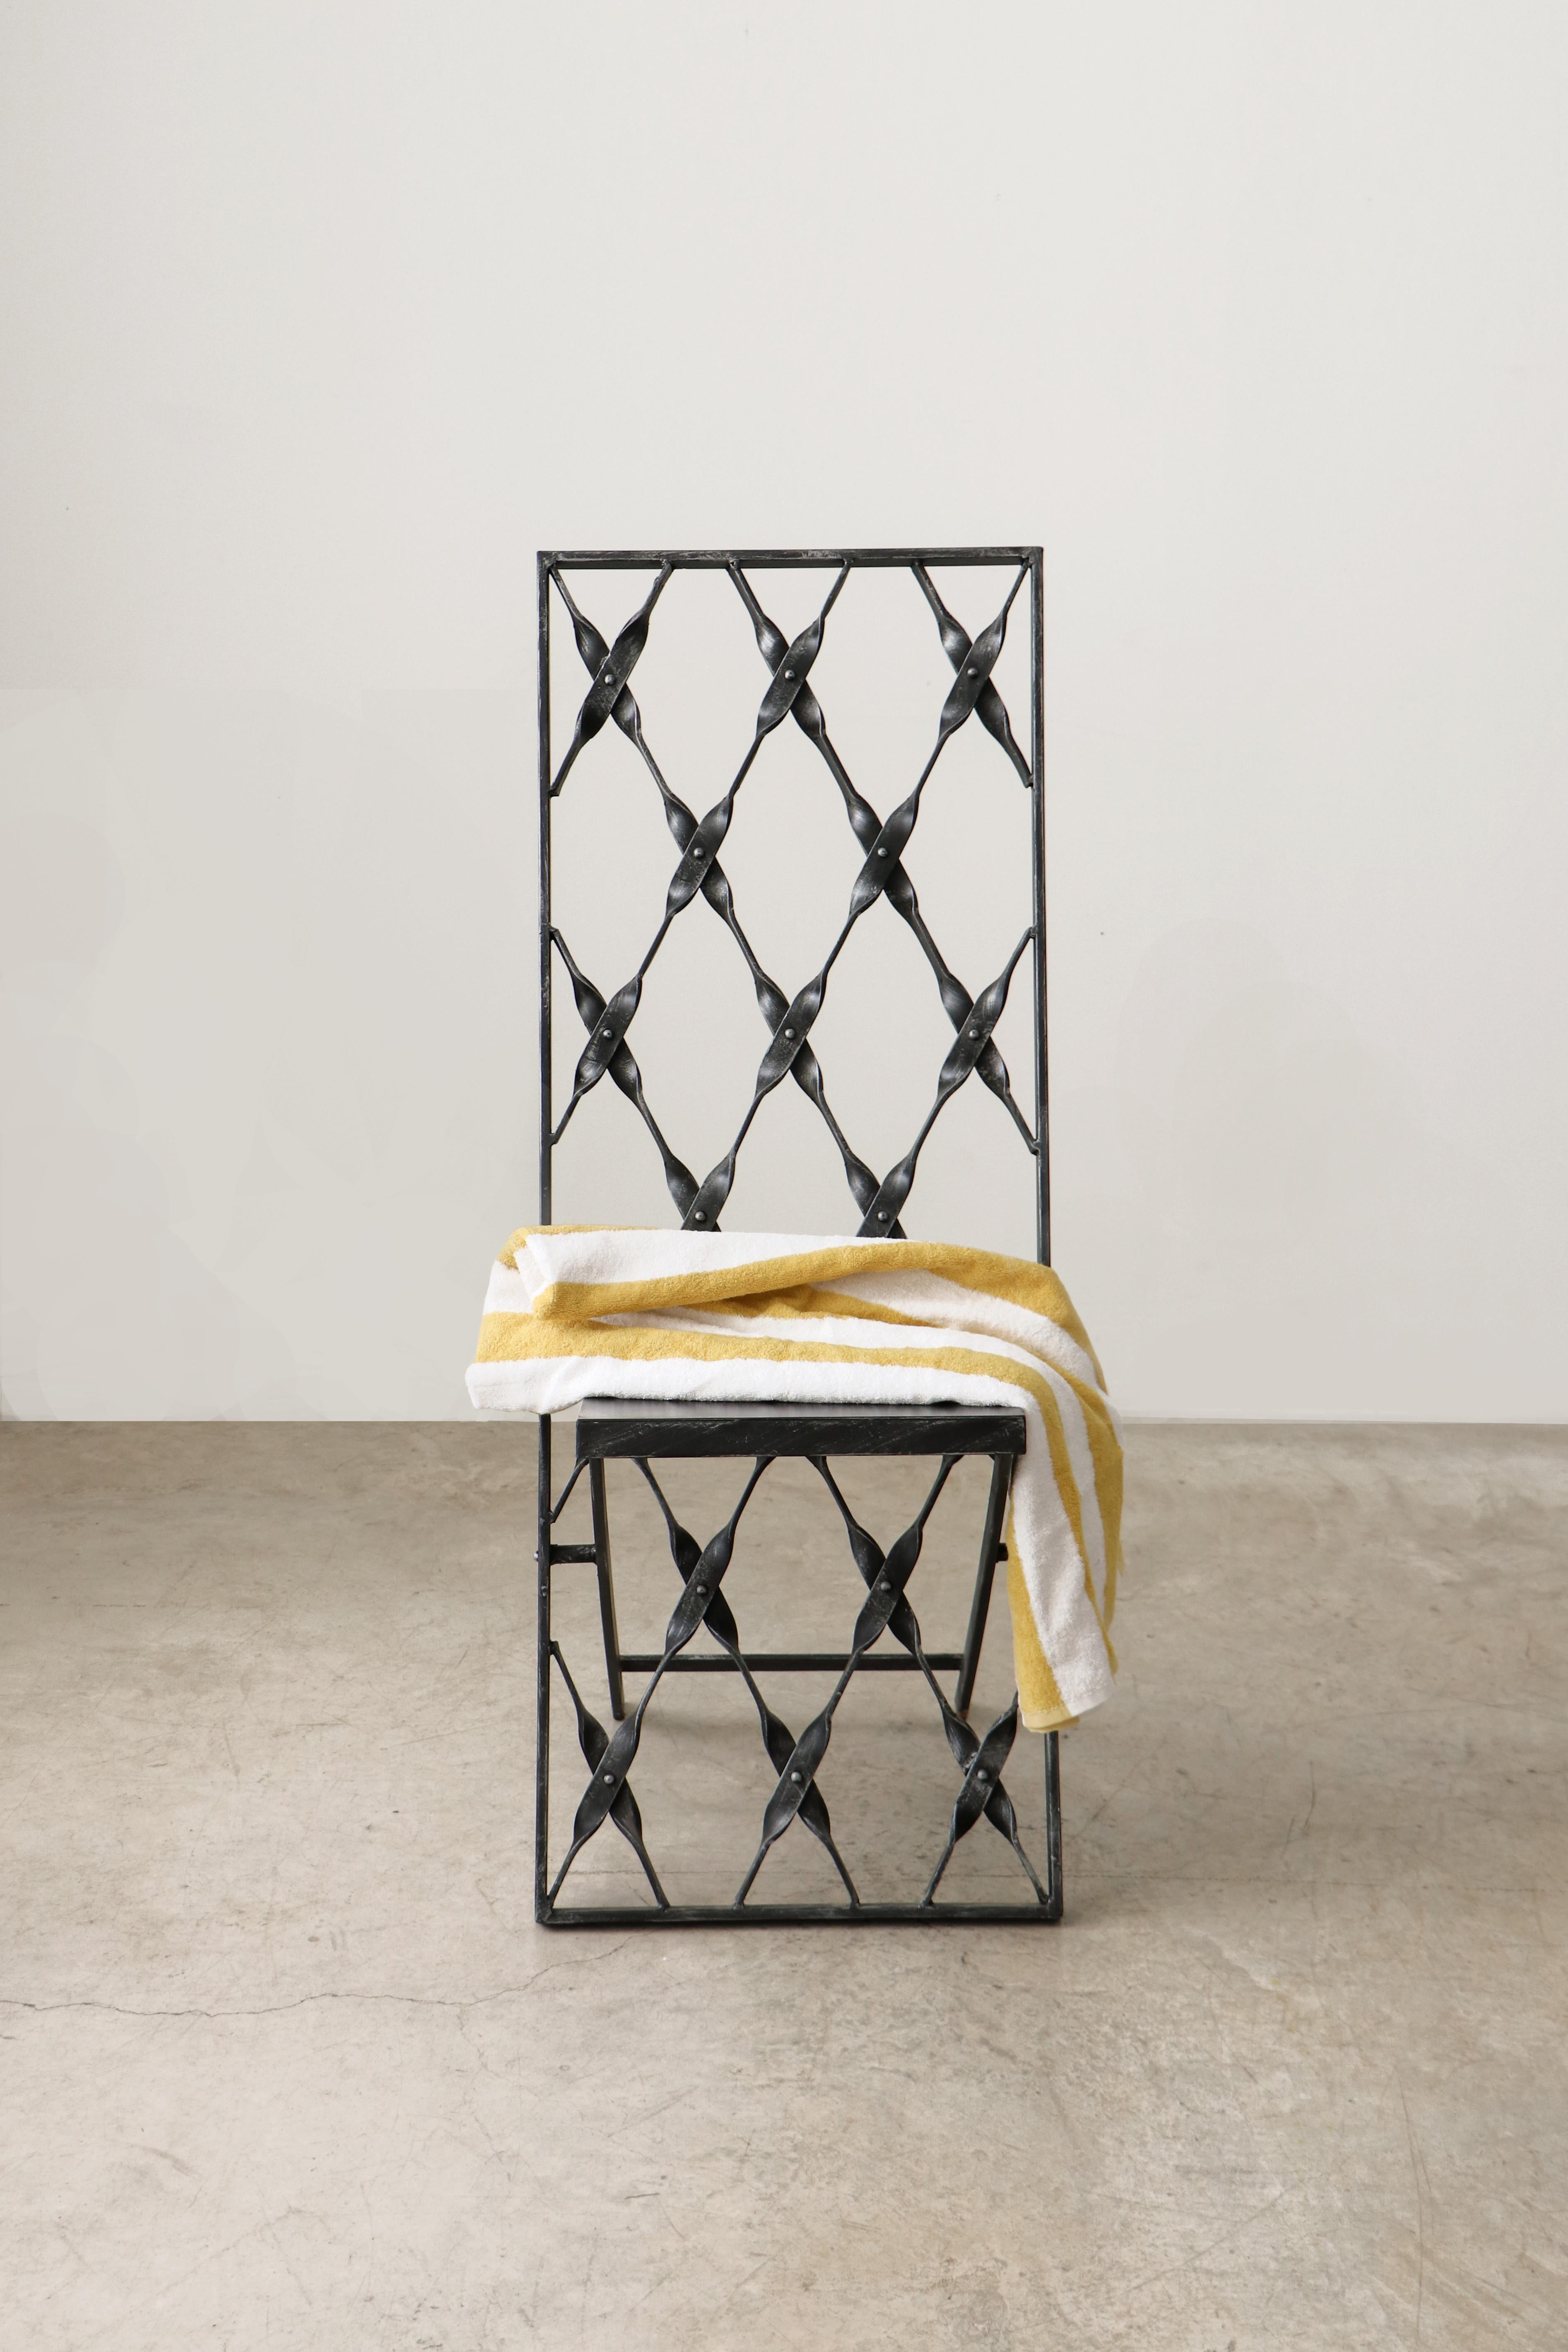 The Fierro chair is a functional brutal style piece, made 100% of wrought iron using a traditional artisanal manufacturing process.

Through this sculptural chair, the artist wants to express the sensual attractiveness of the strength of this